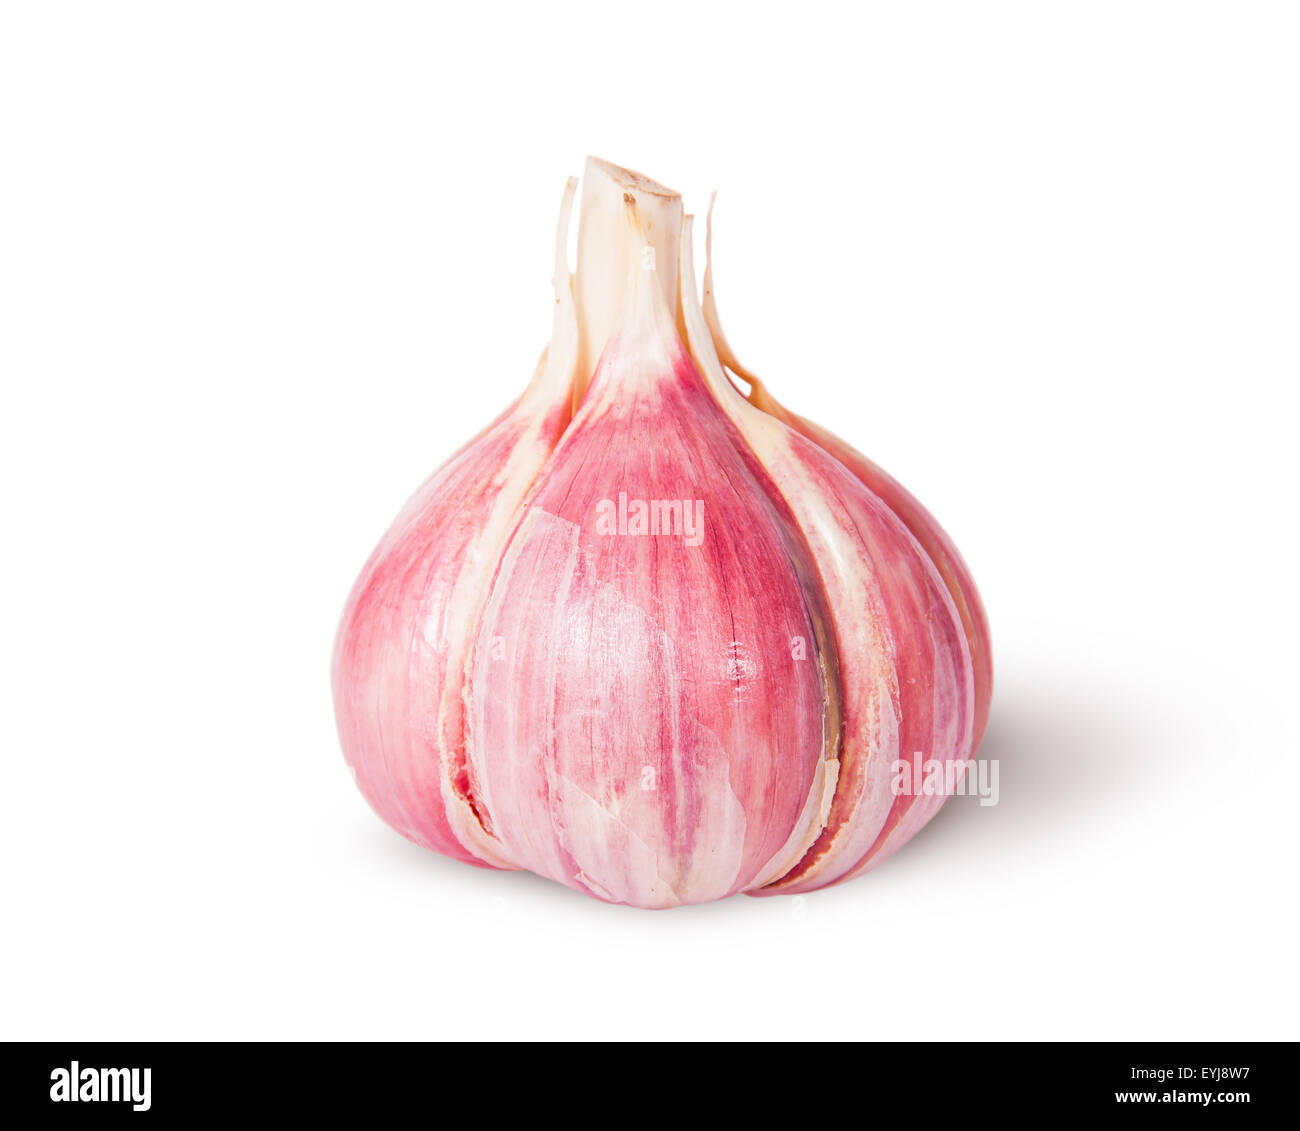 Young fresh whole head of garlic isolated on white background Stock Photo